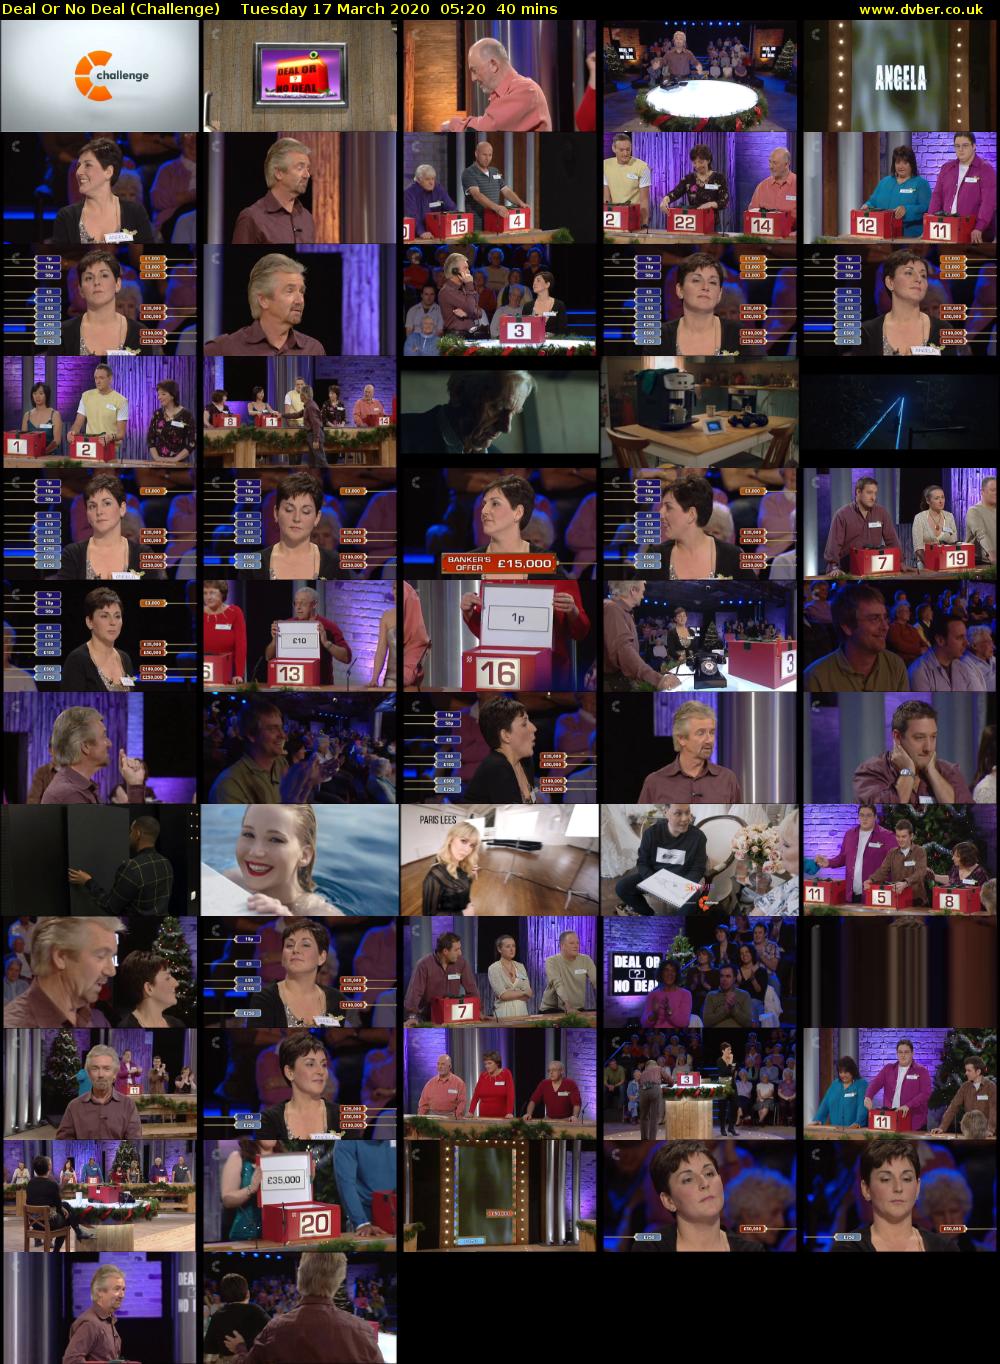 Deal Or No Deal (Challenge) Tuesday 17 March 2020 05:20 - 06:00